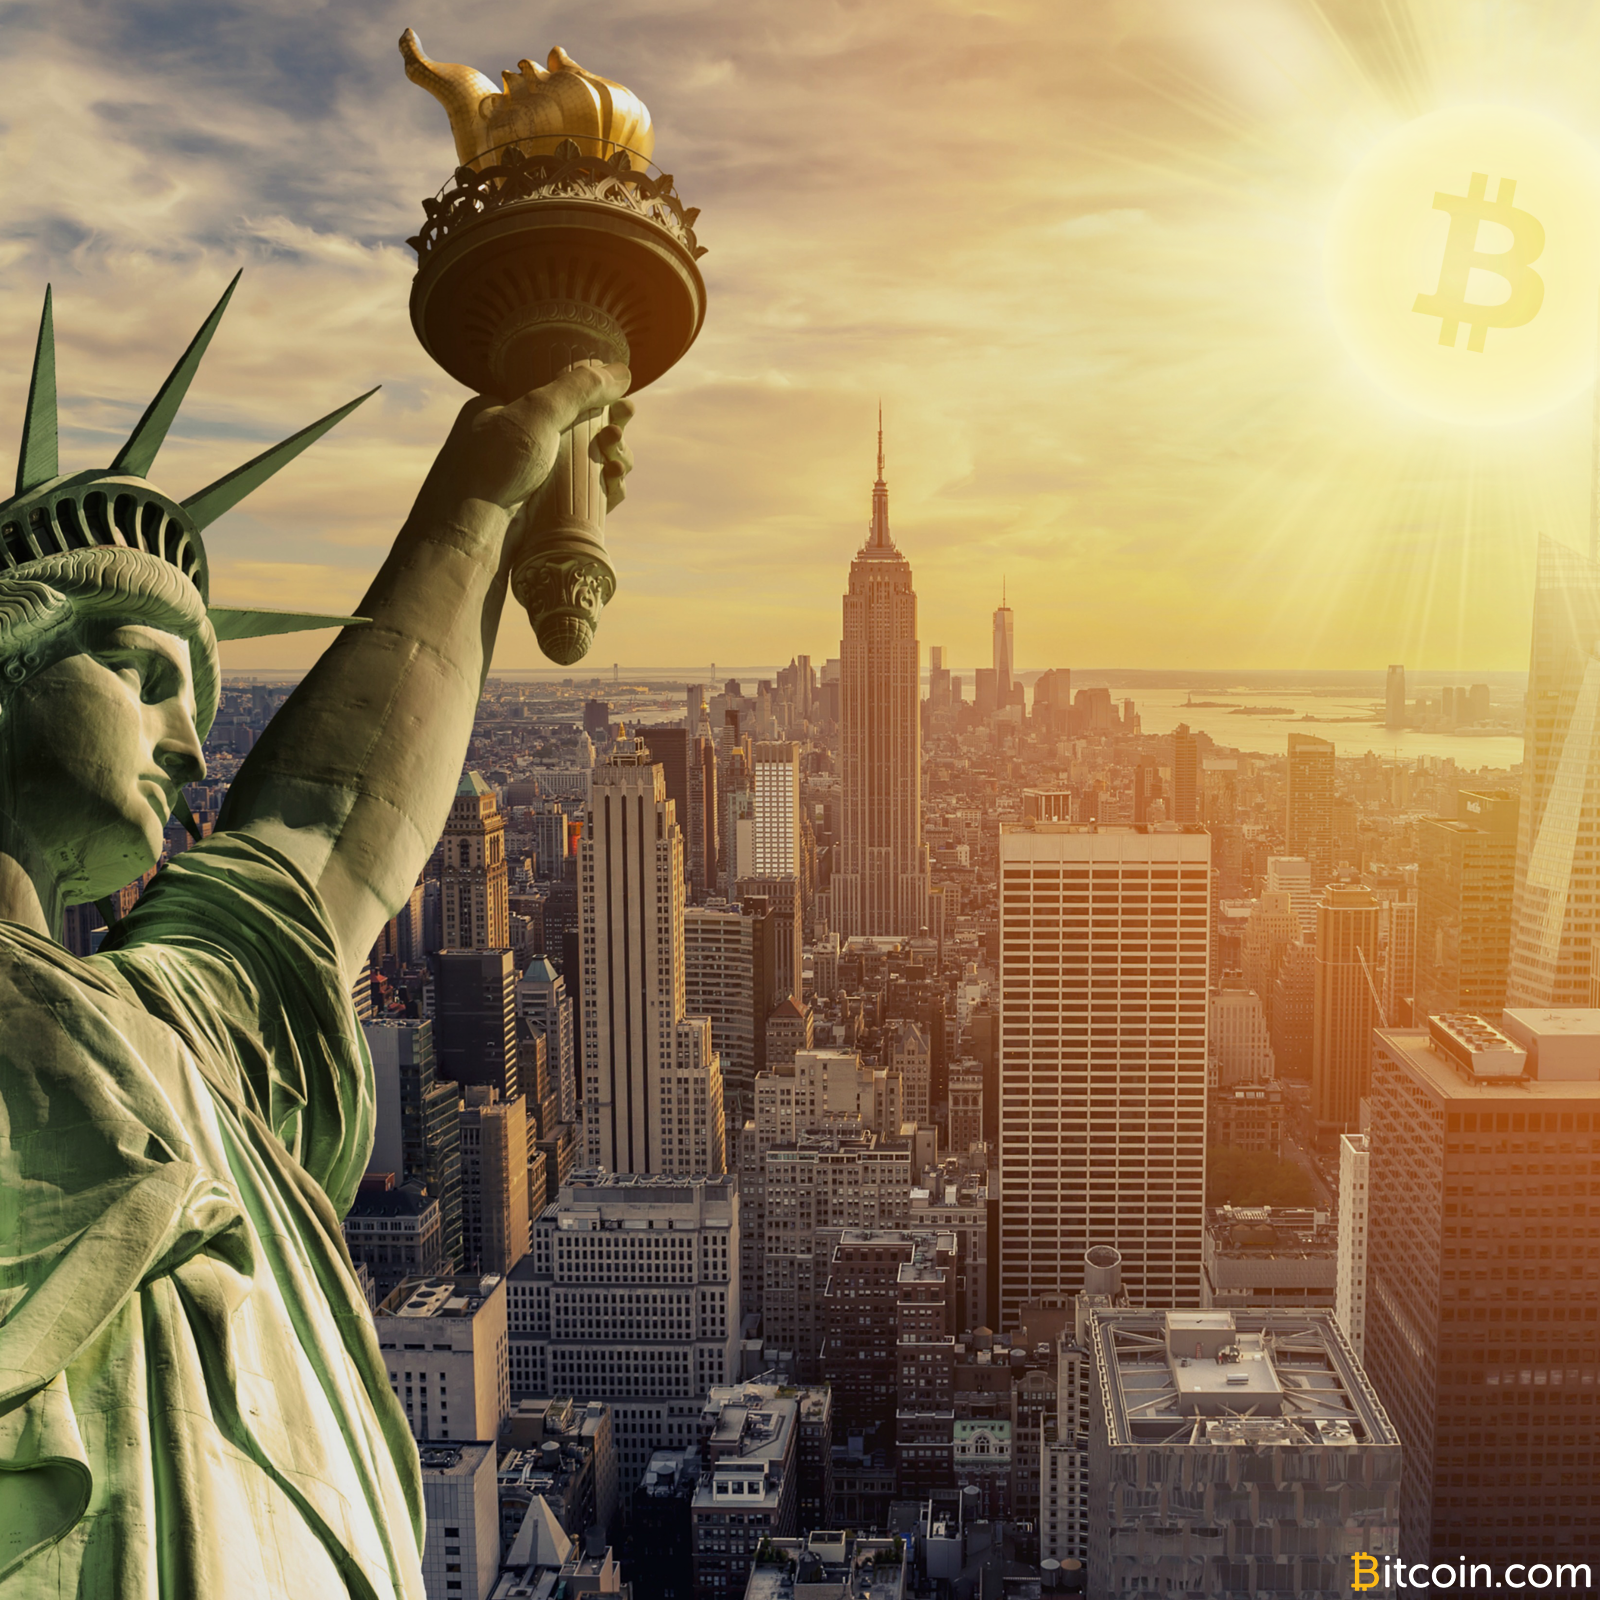 New York City Employee Disciplined For Mining Bitcoin at Work